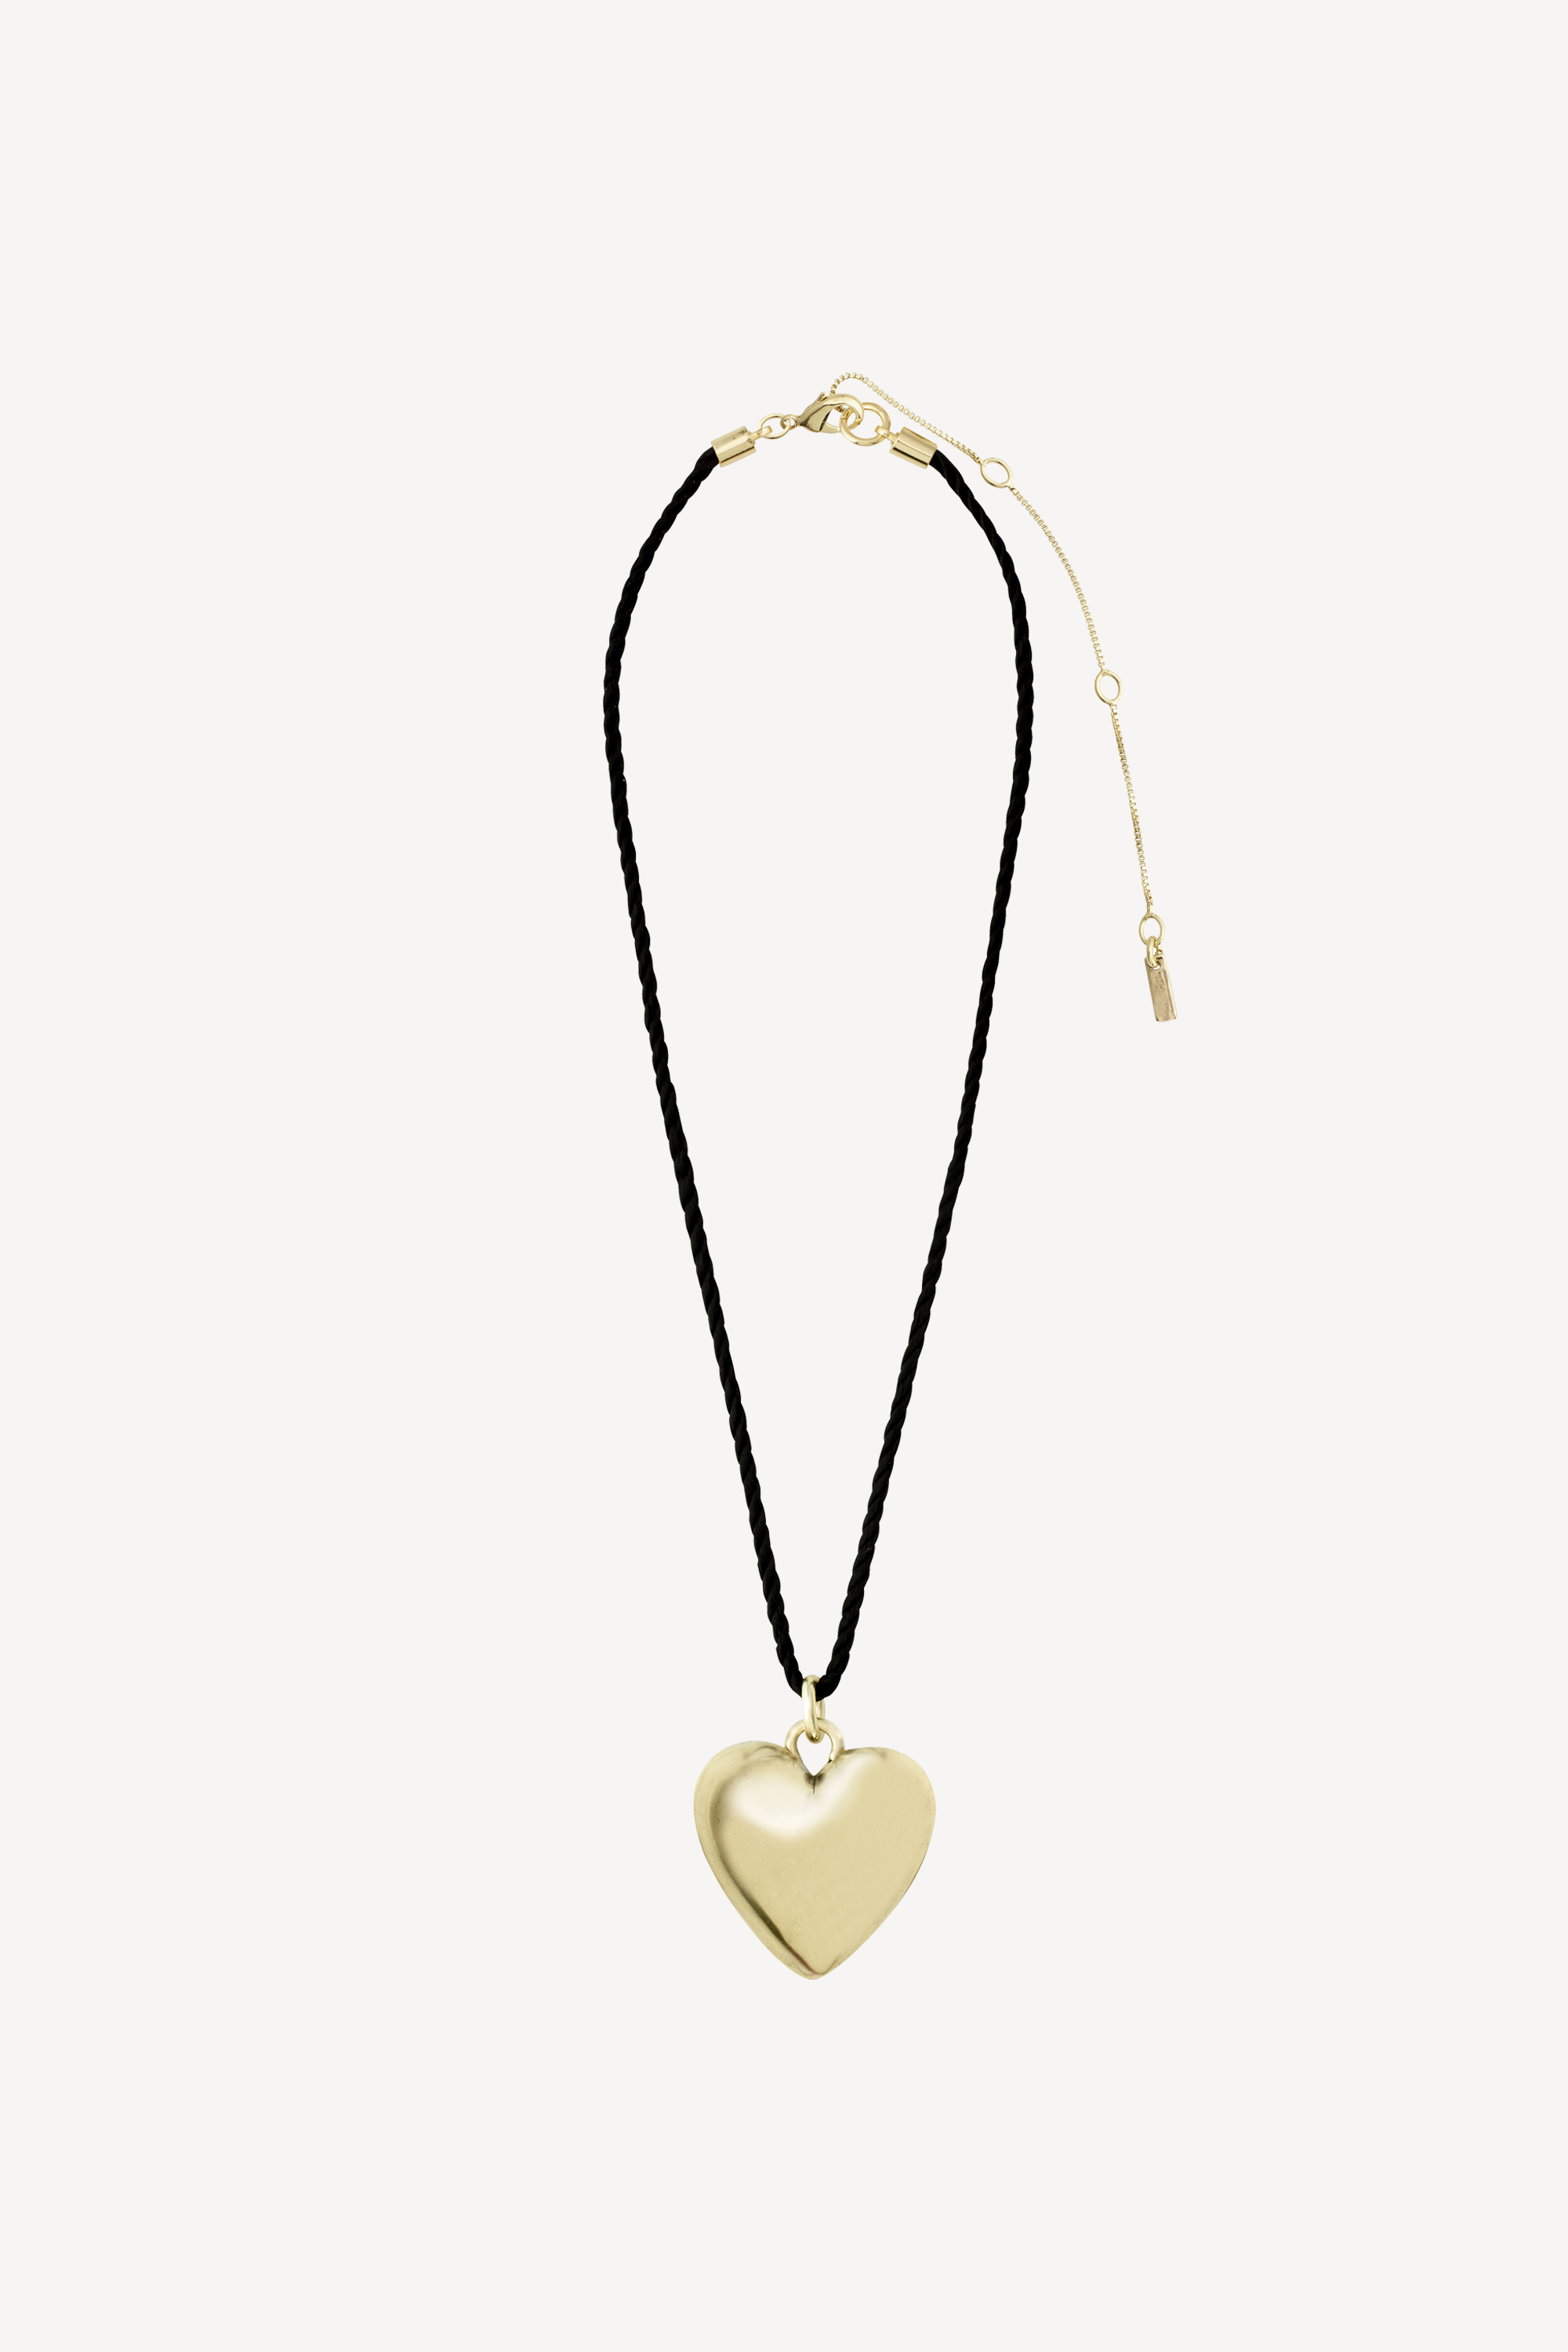 Reflect Heart Necklace Gold